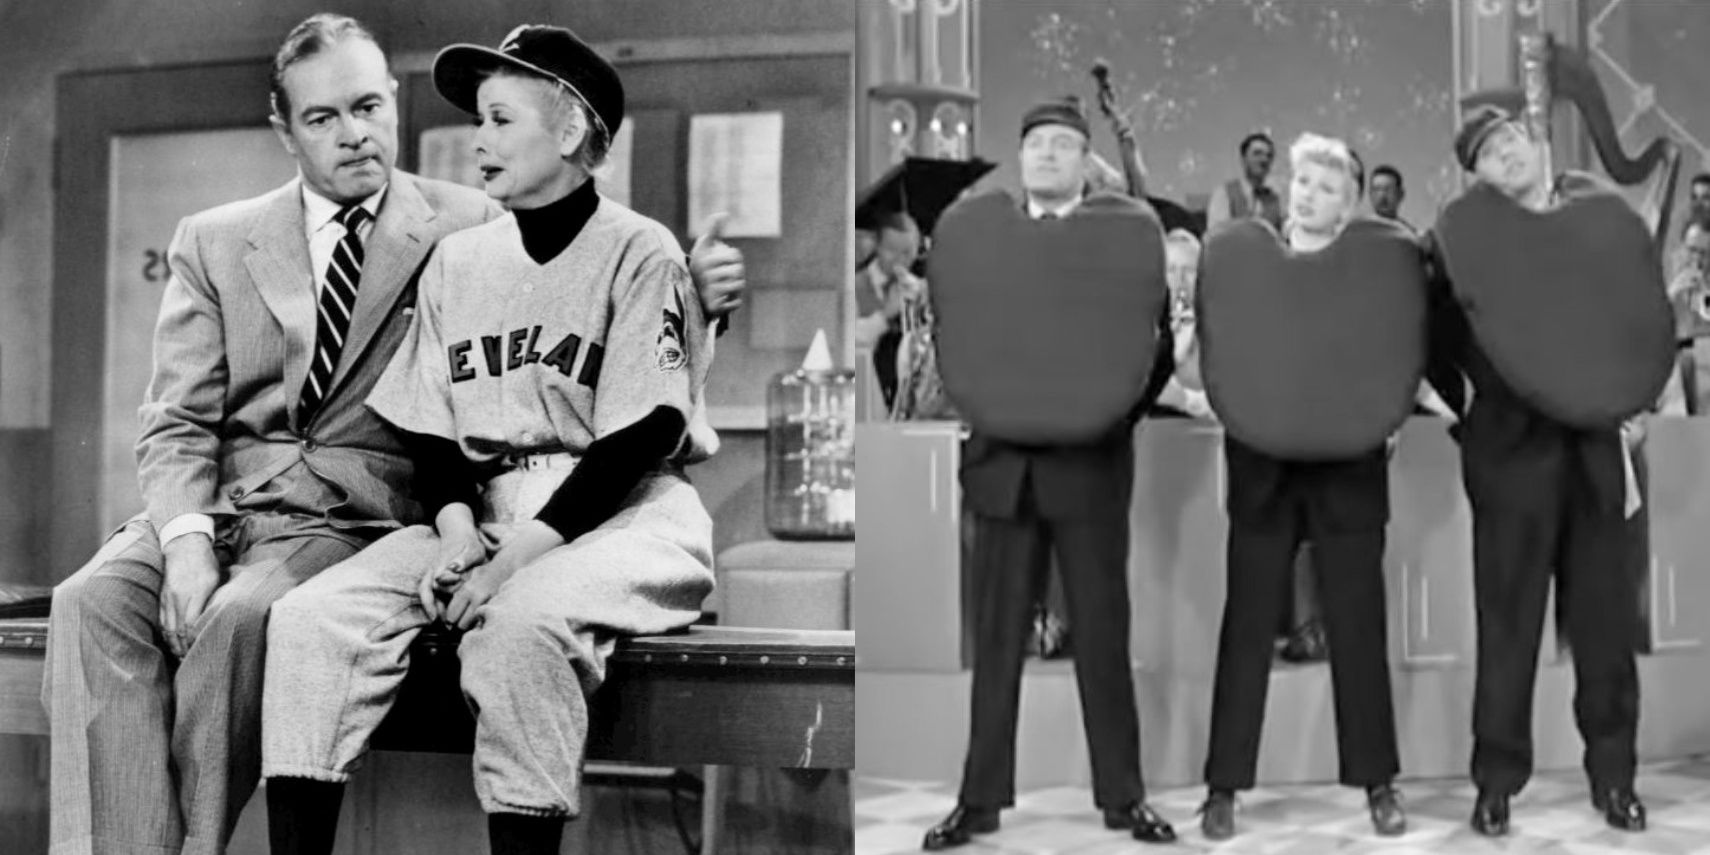 Lucy Ricardo (Lucille Ball) dressed in a baseball uniform with Bob Hope; Lucy Ricardo, Ricky Ricardo (Desi Arnaz) and Bob Hope performing while dressed as baseball umpires in &quot;I Love Lucy.&quot;